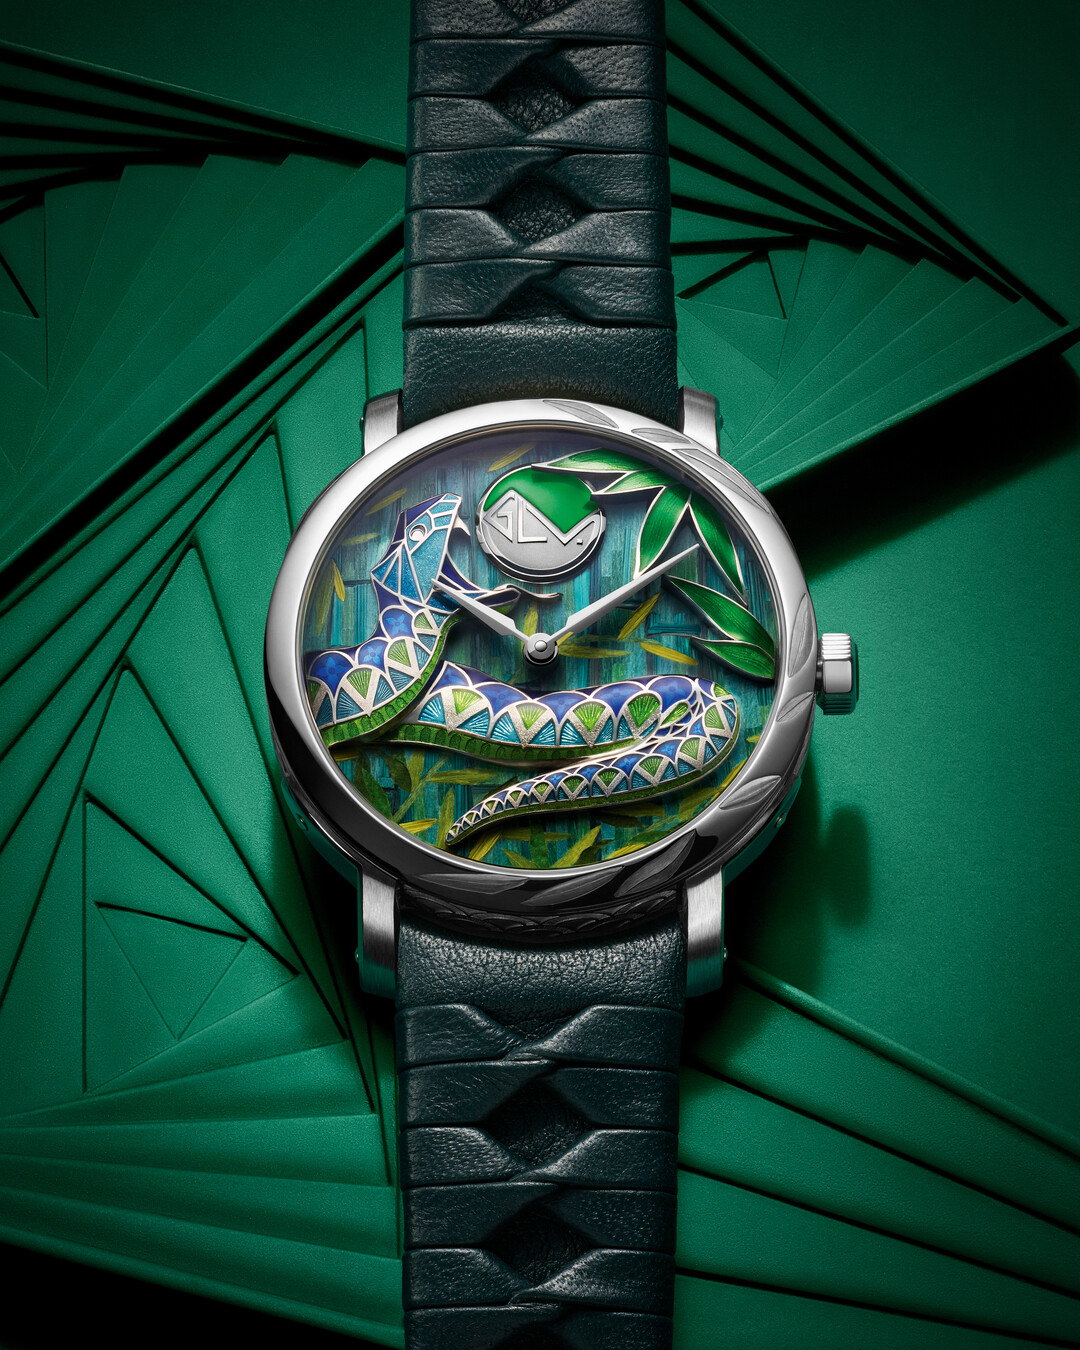 Luxury watch with intricate leaf design on the face and black leather strap, placed on a patterned background